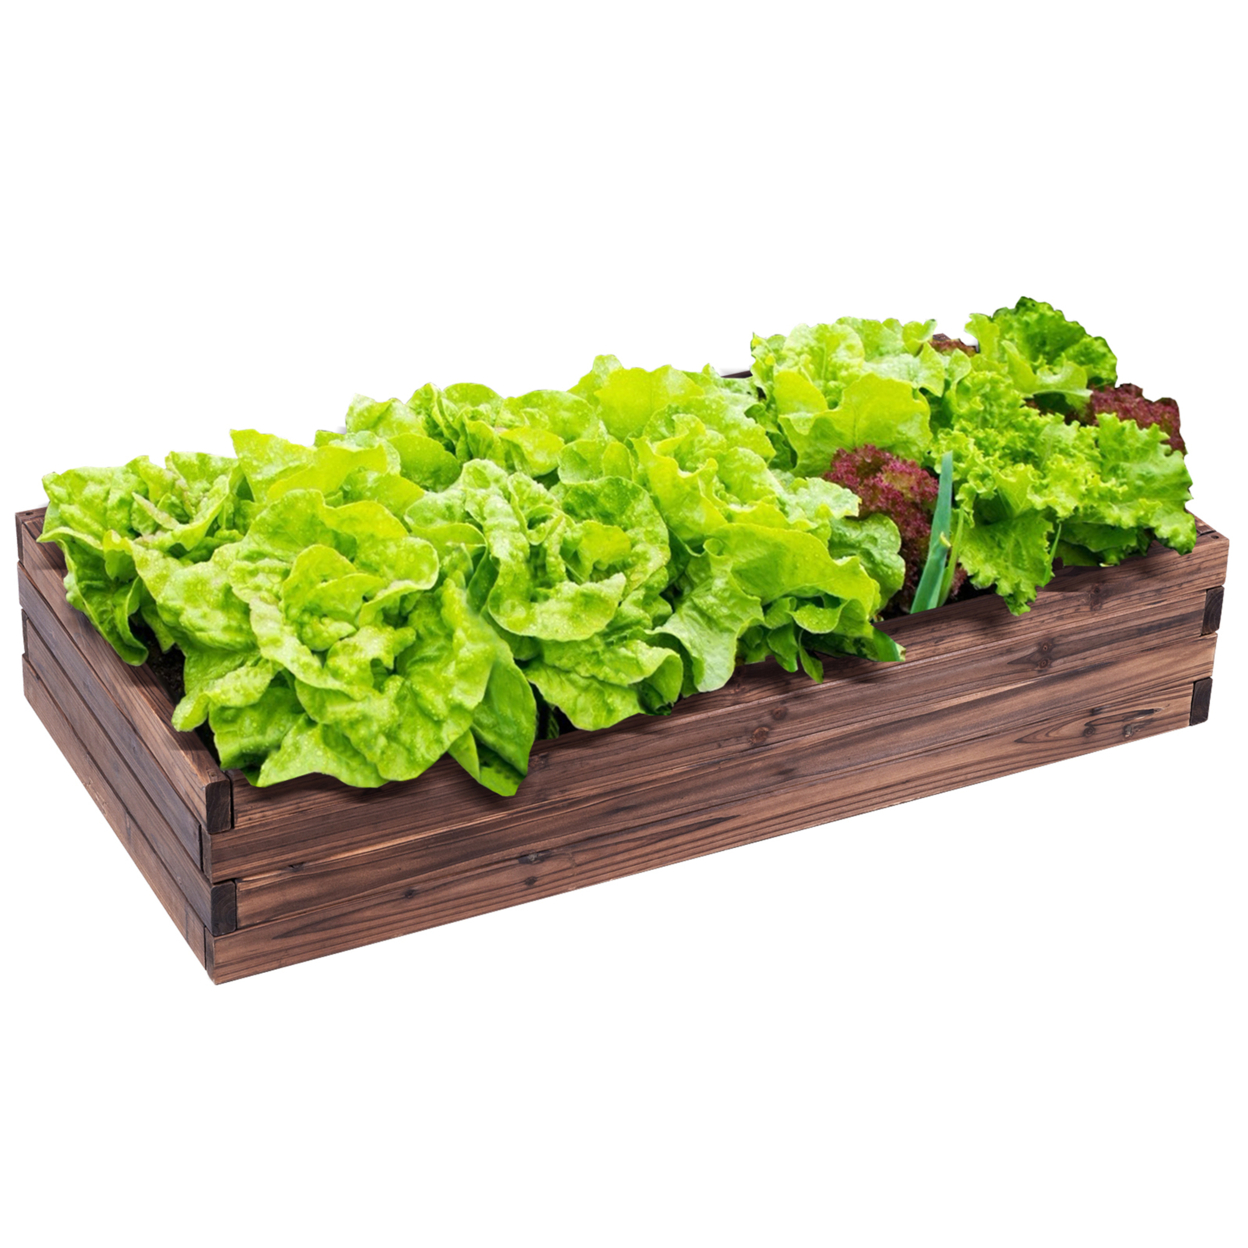 Wooden Raised Garden Bed Kit - Elevated Planter Box For Growing Herbs Vegetable